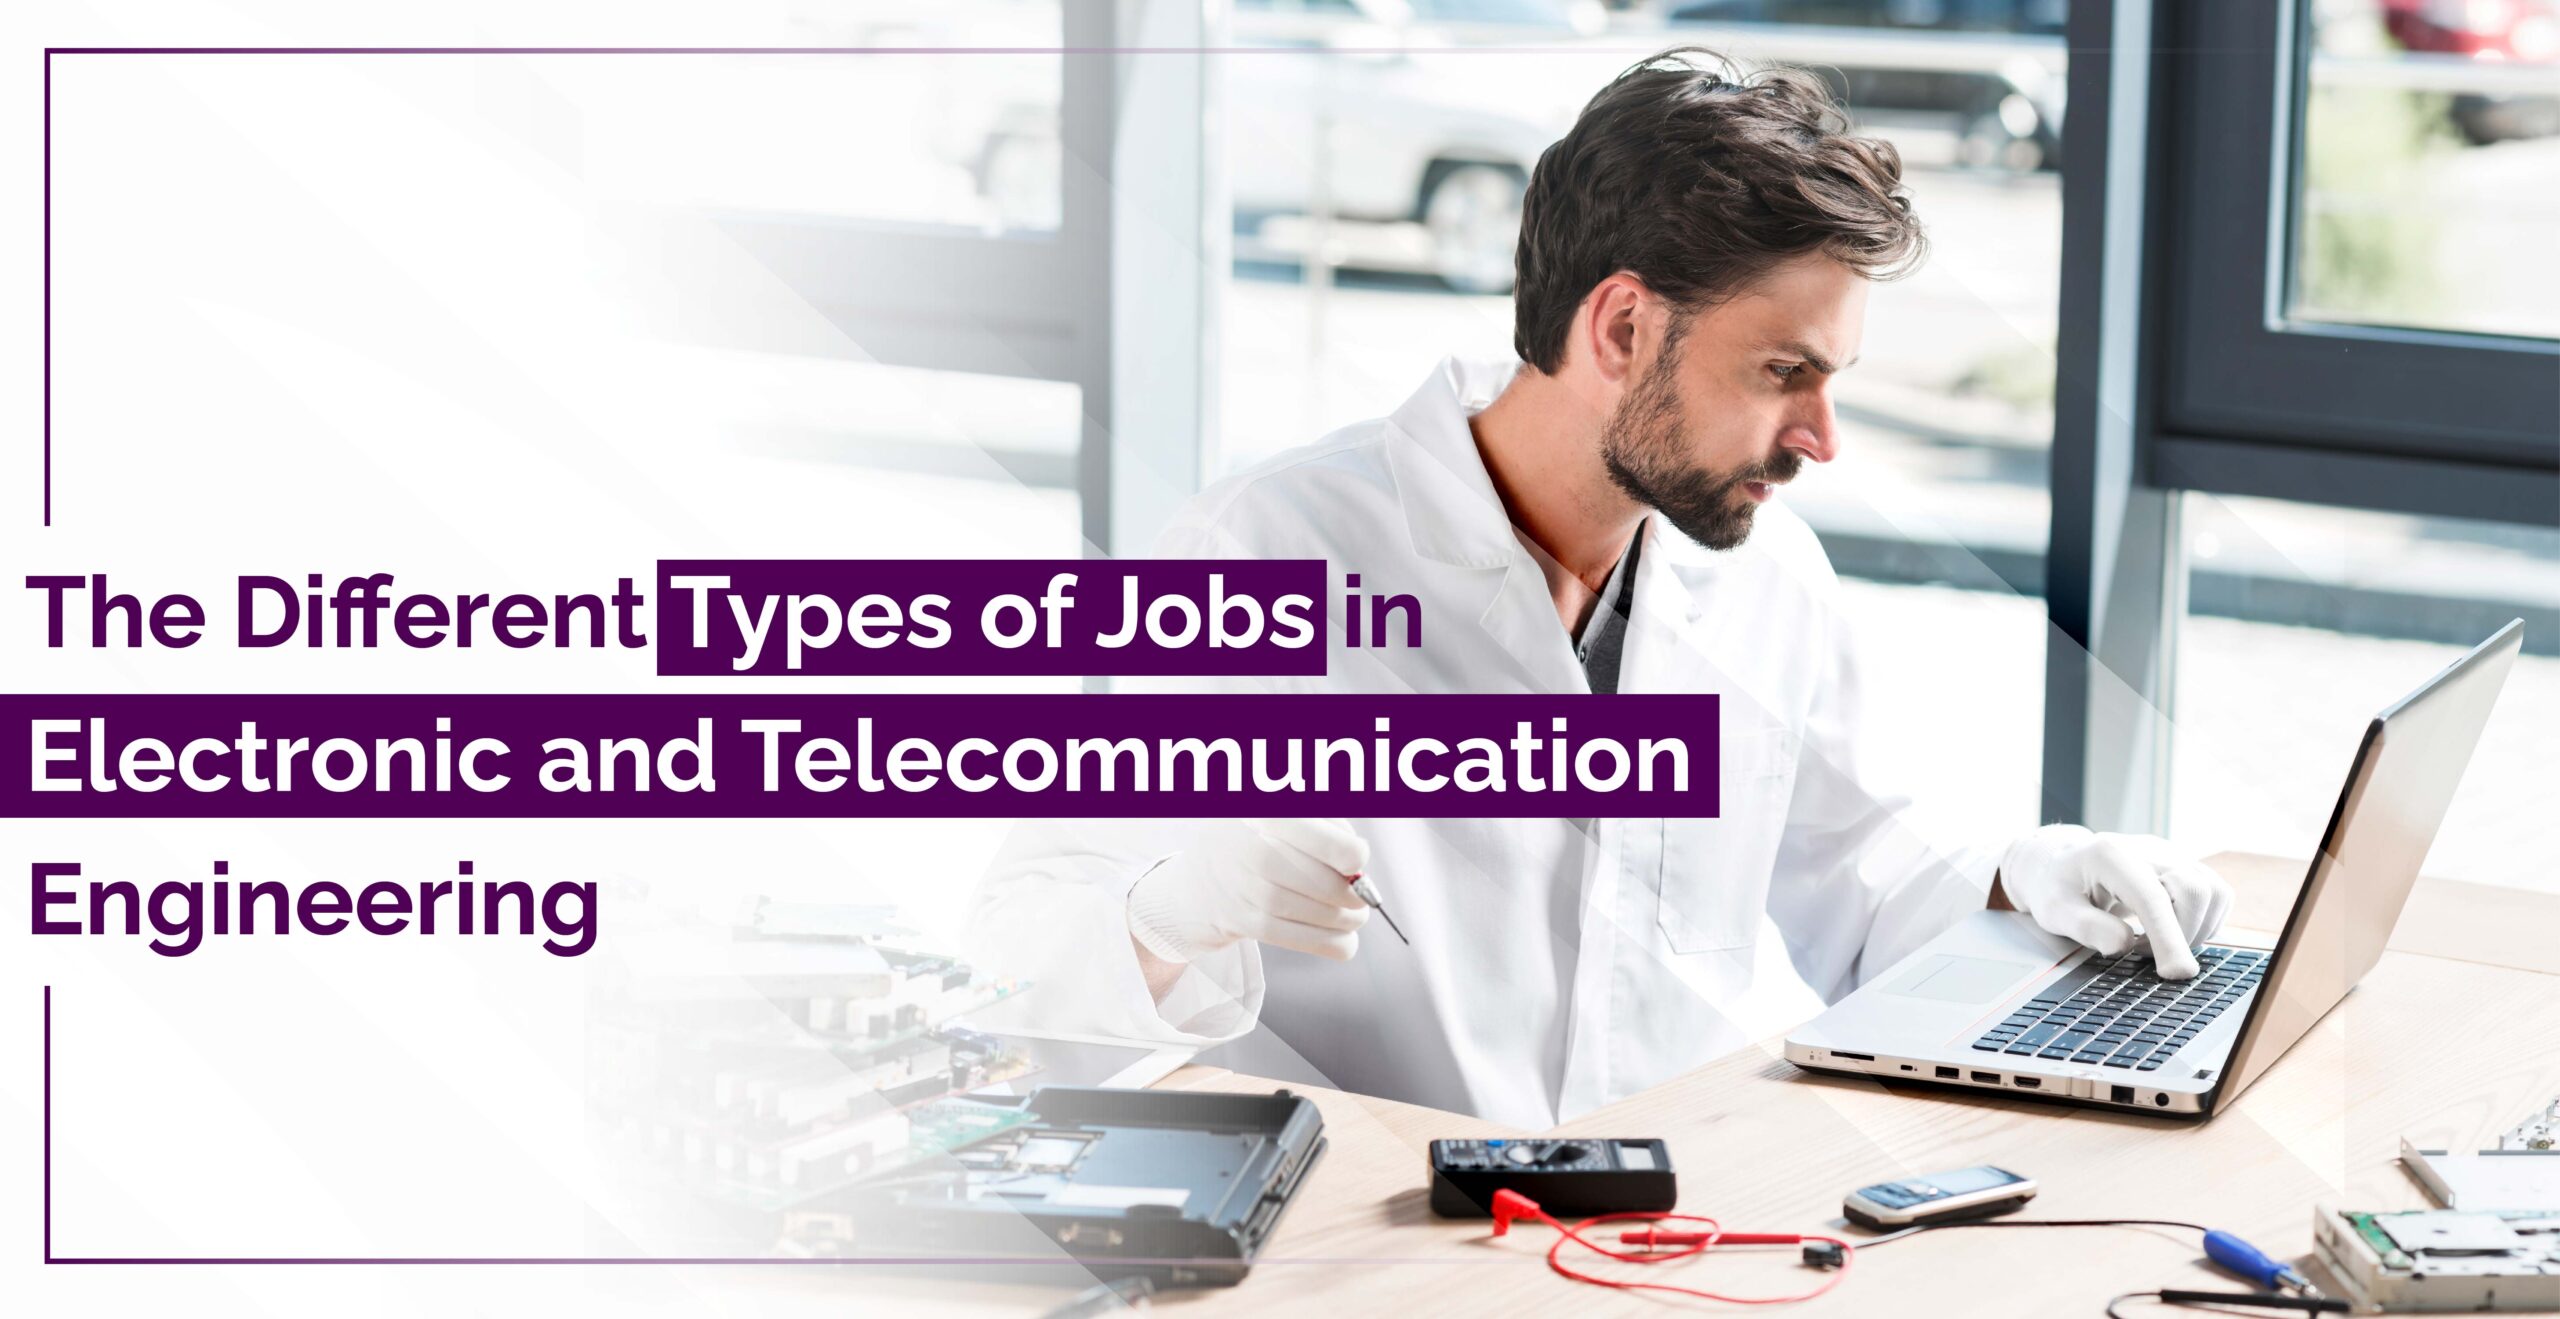 The Different Types of Jobs in Electronic and Telecommunication Engineering